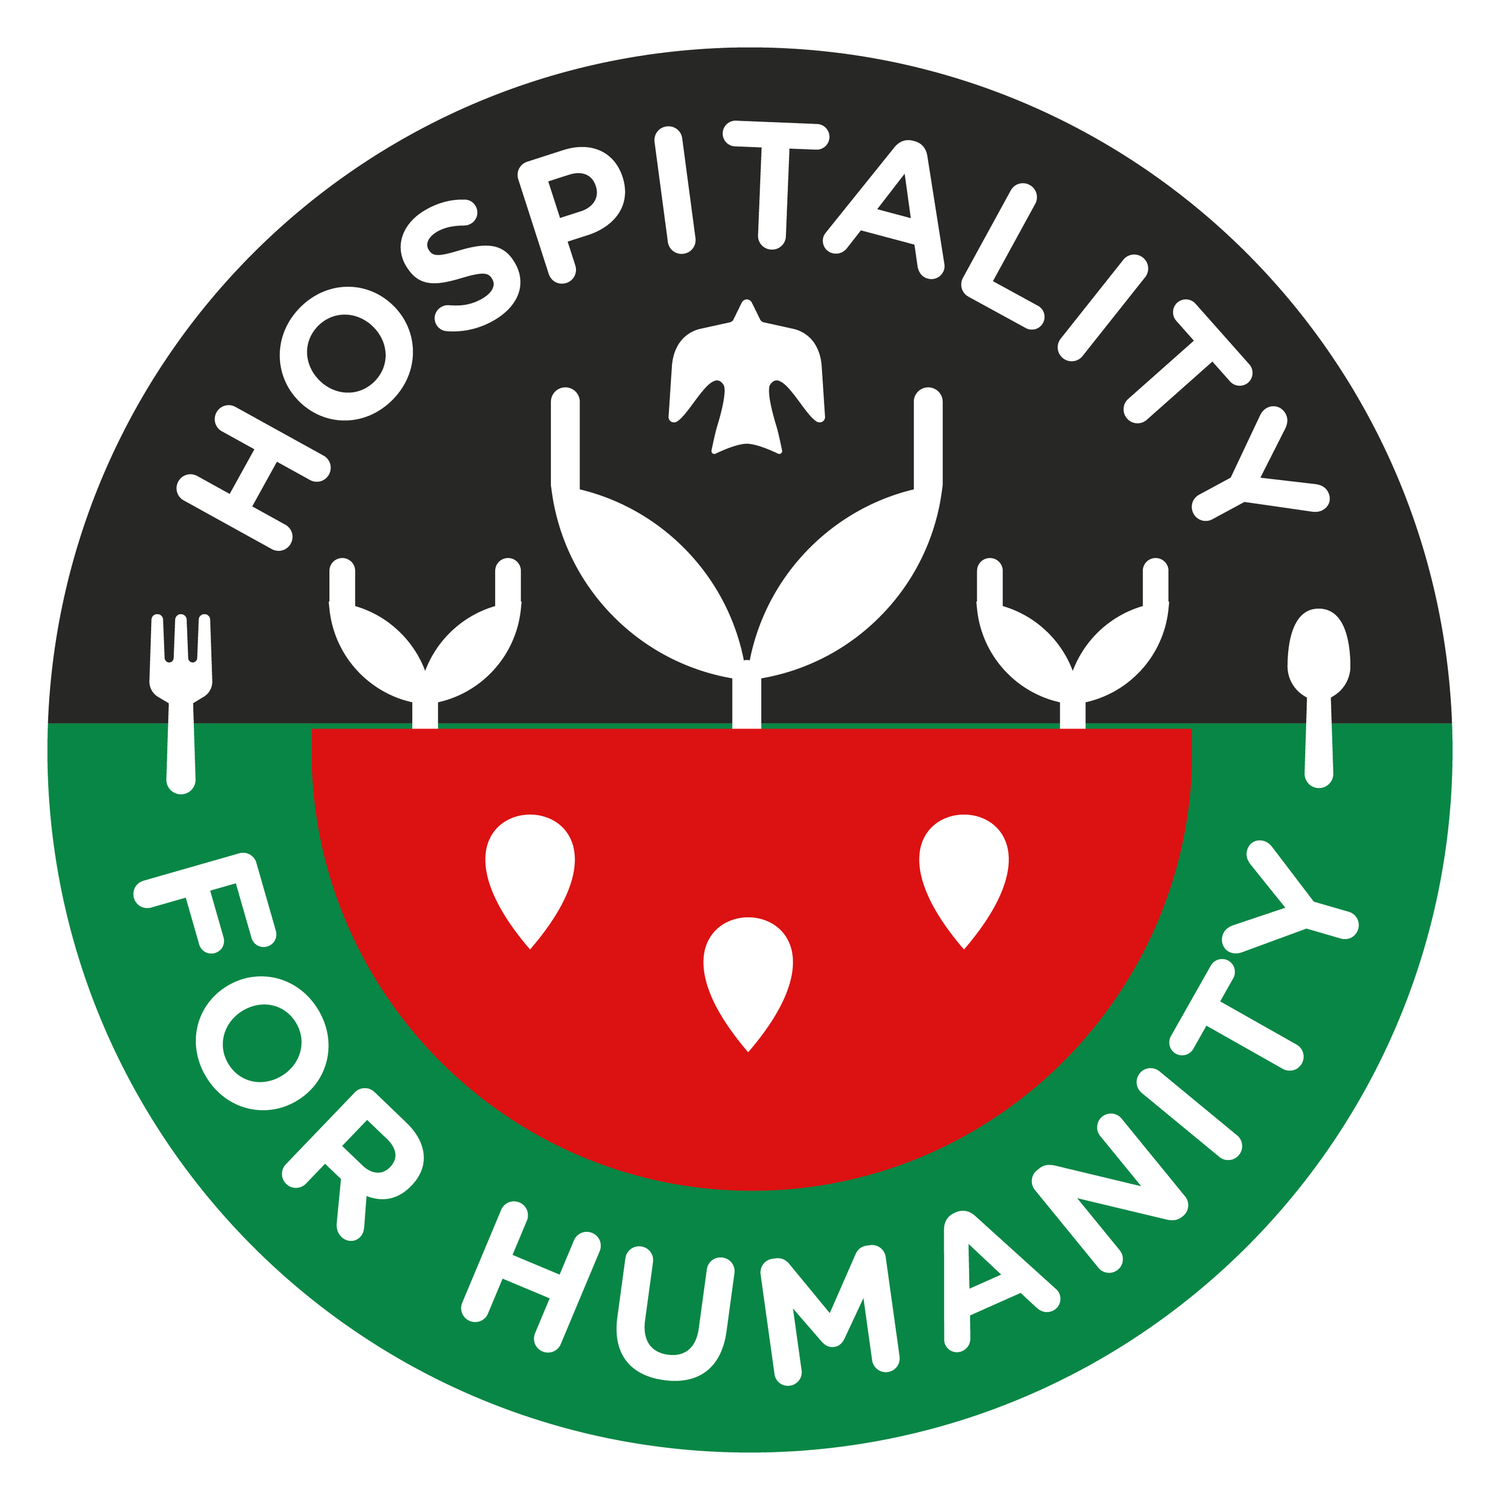 Hospitality for Humanity